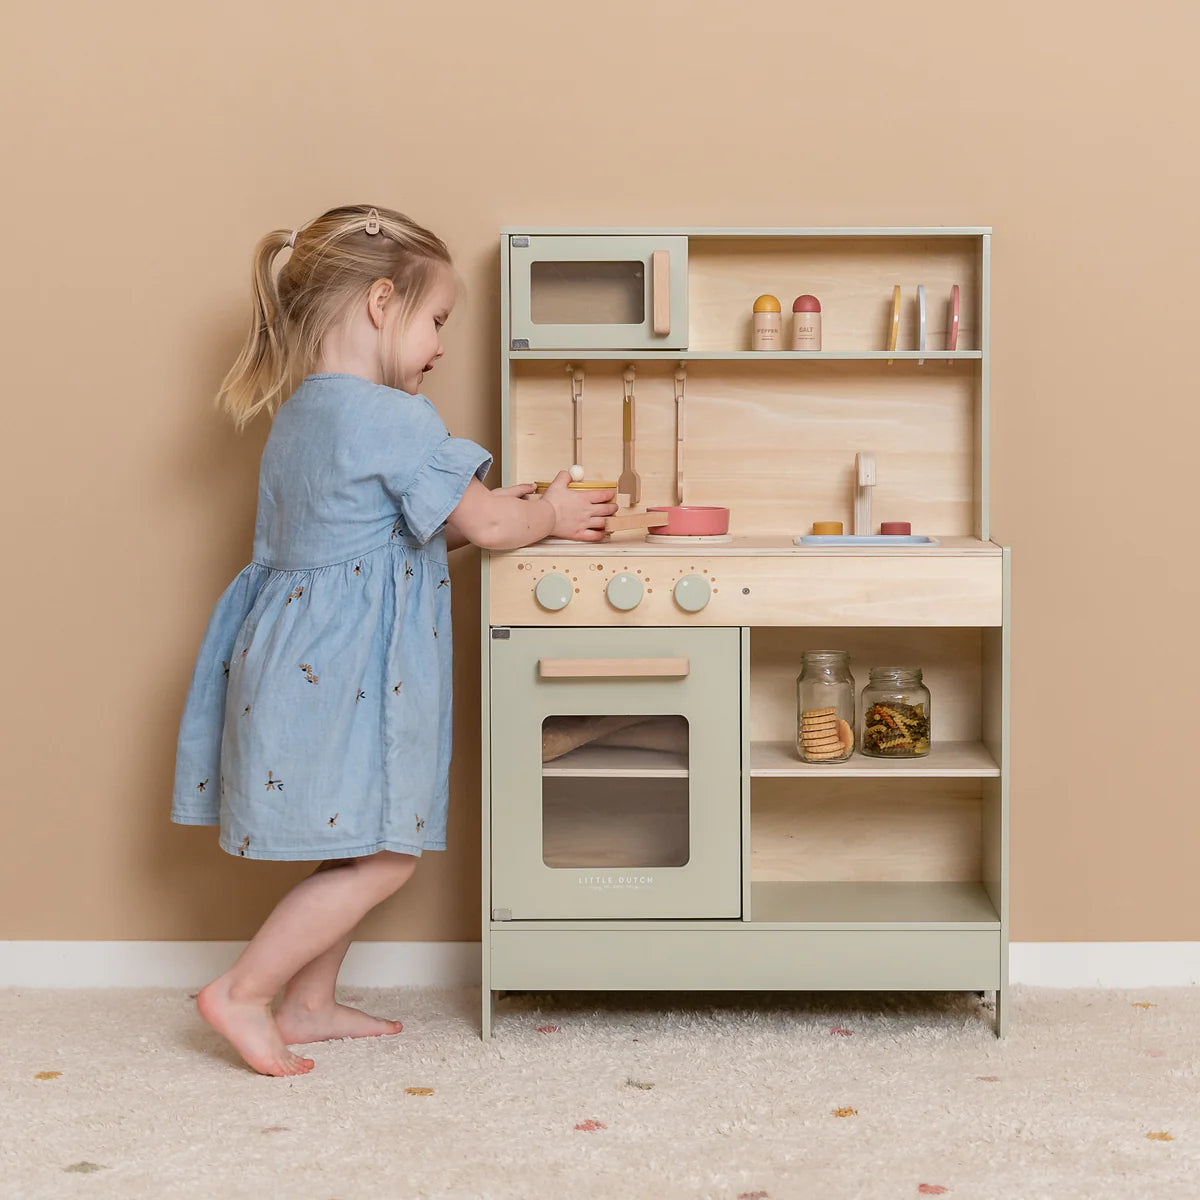 The Little Dutch Play Kitchen is suitable for children aged 3 and up with lots of imaginative play value